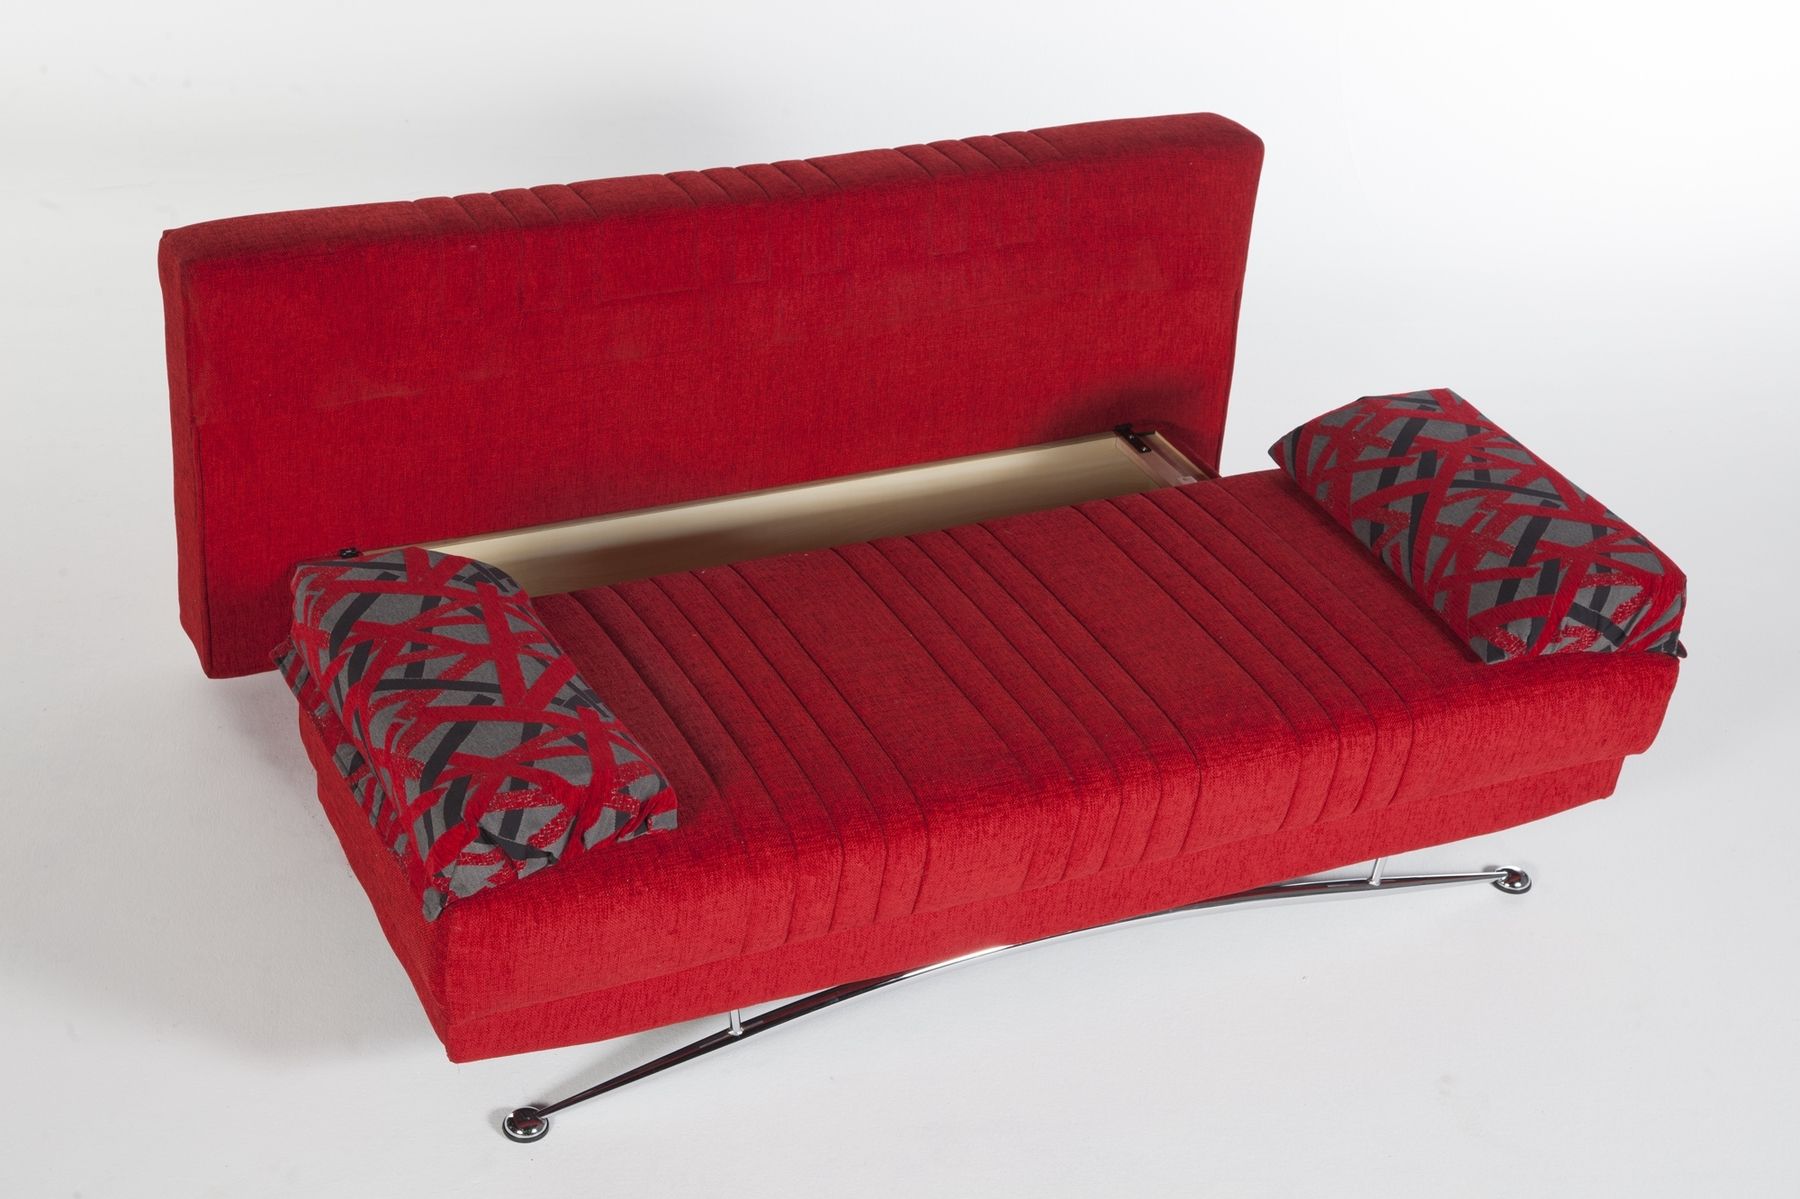 Fantasy Red Sofa Bed Sufantasy Sunset Furniture Sleepers, Sofa For Most Current Red Sleeper Sofas (View 18 of 20)